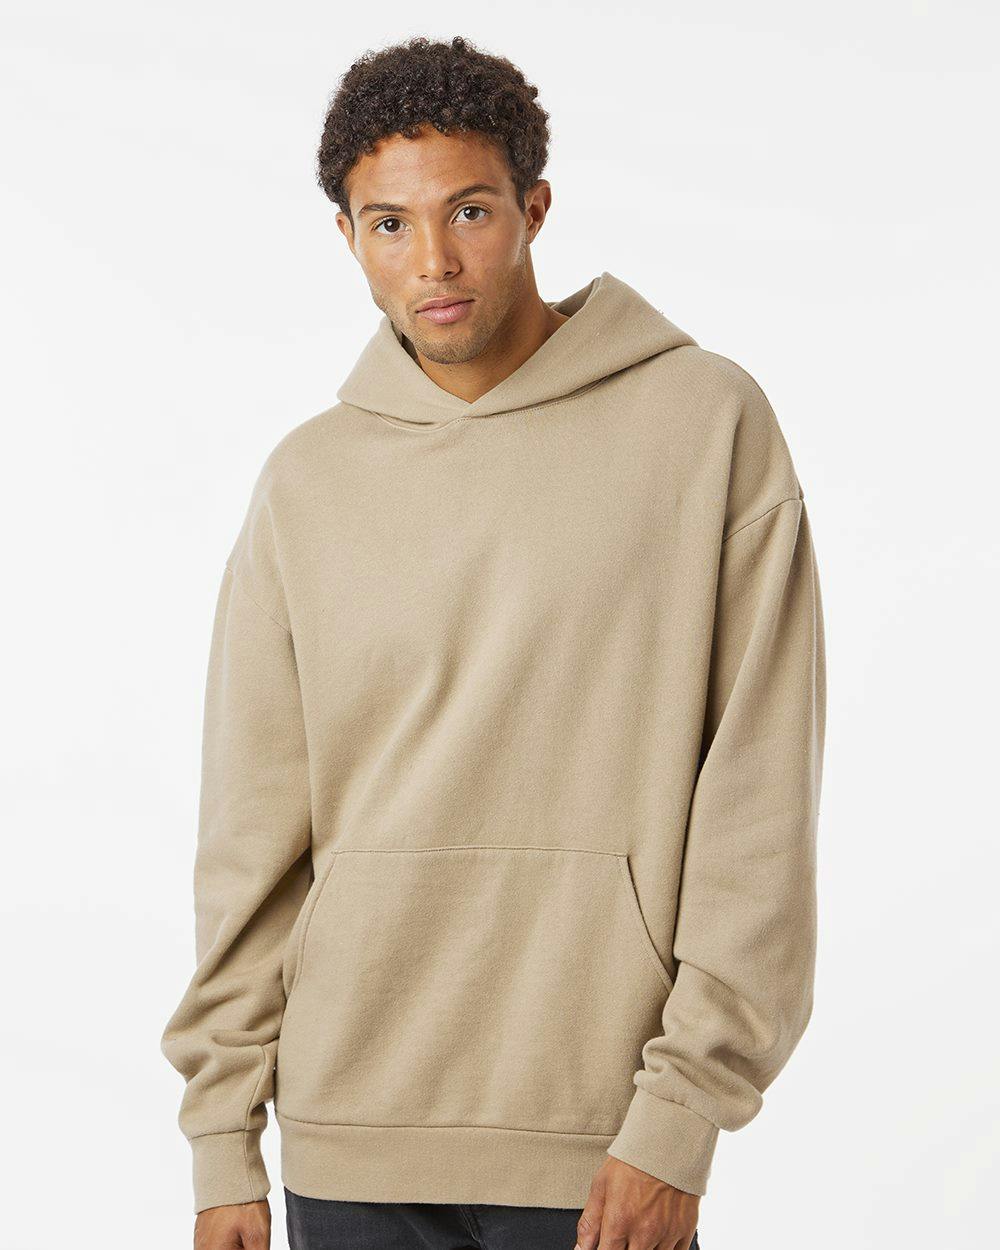 Image for Avenue Pullover Hooded Sweatshirt - IND280SL